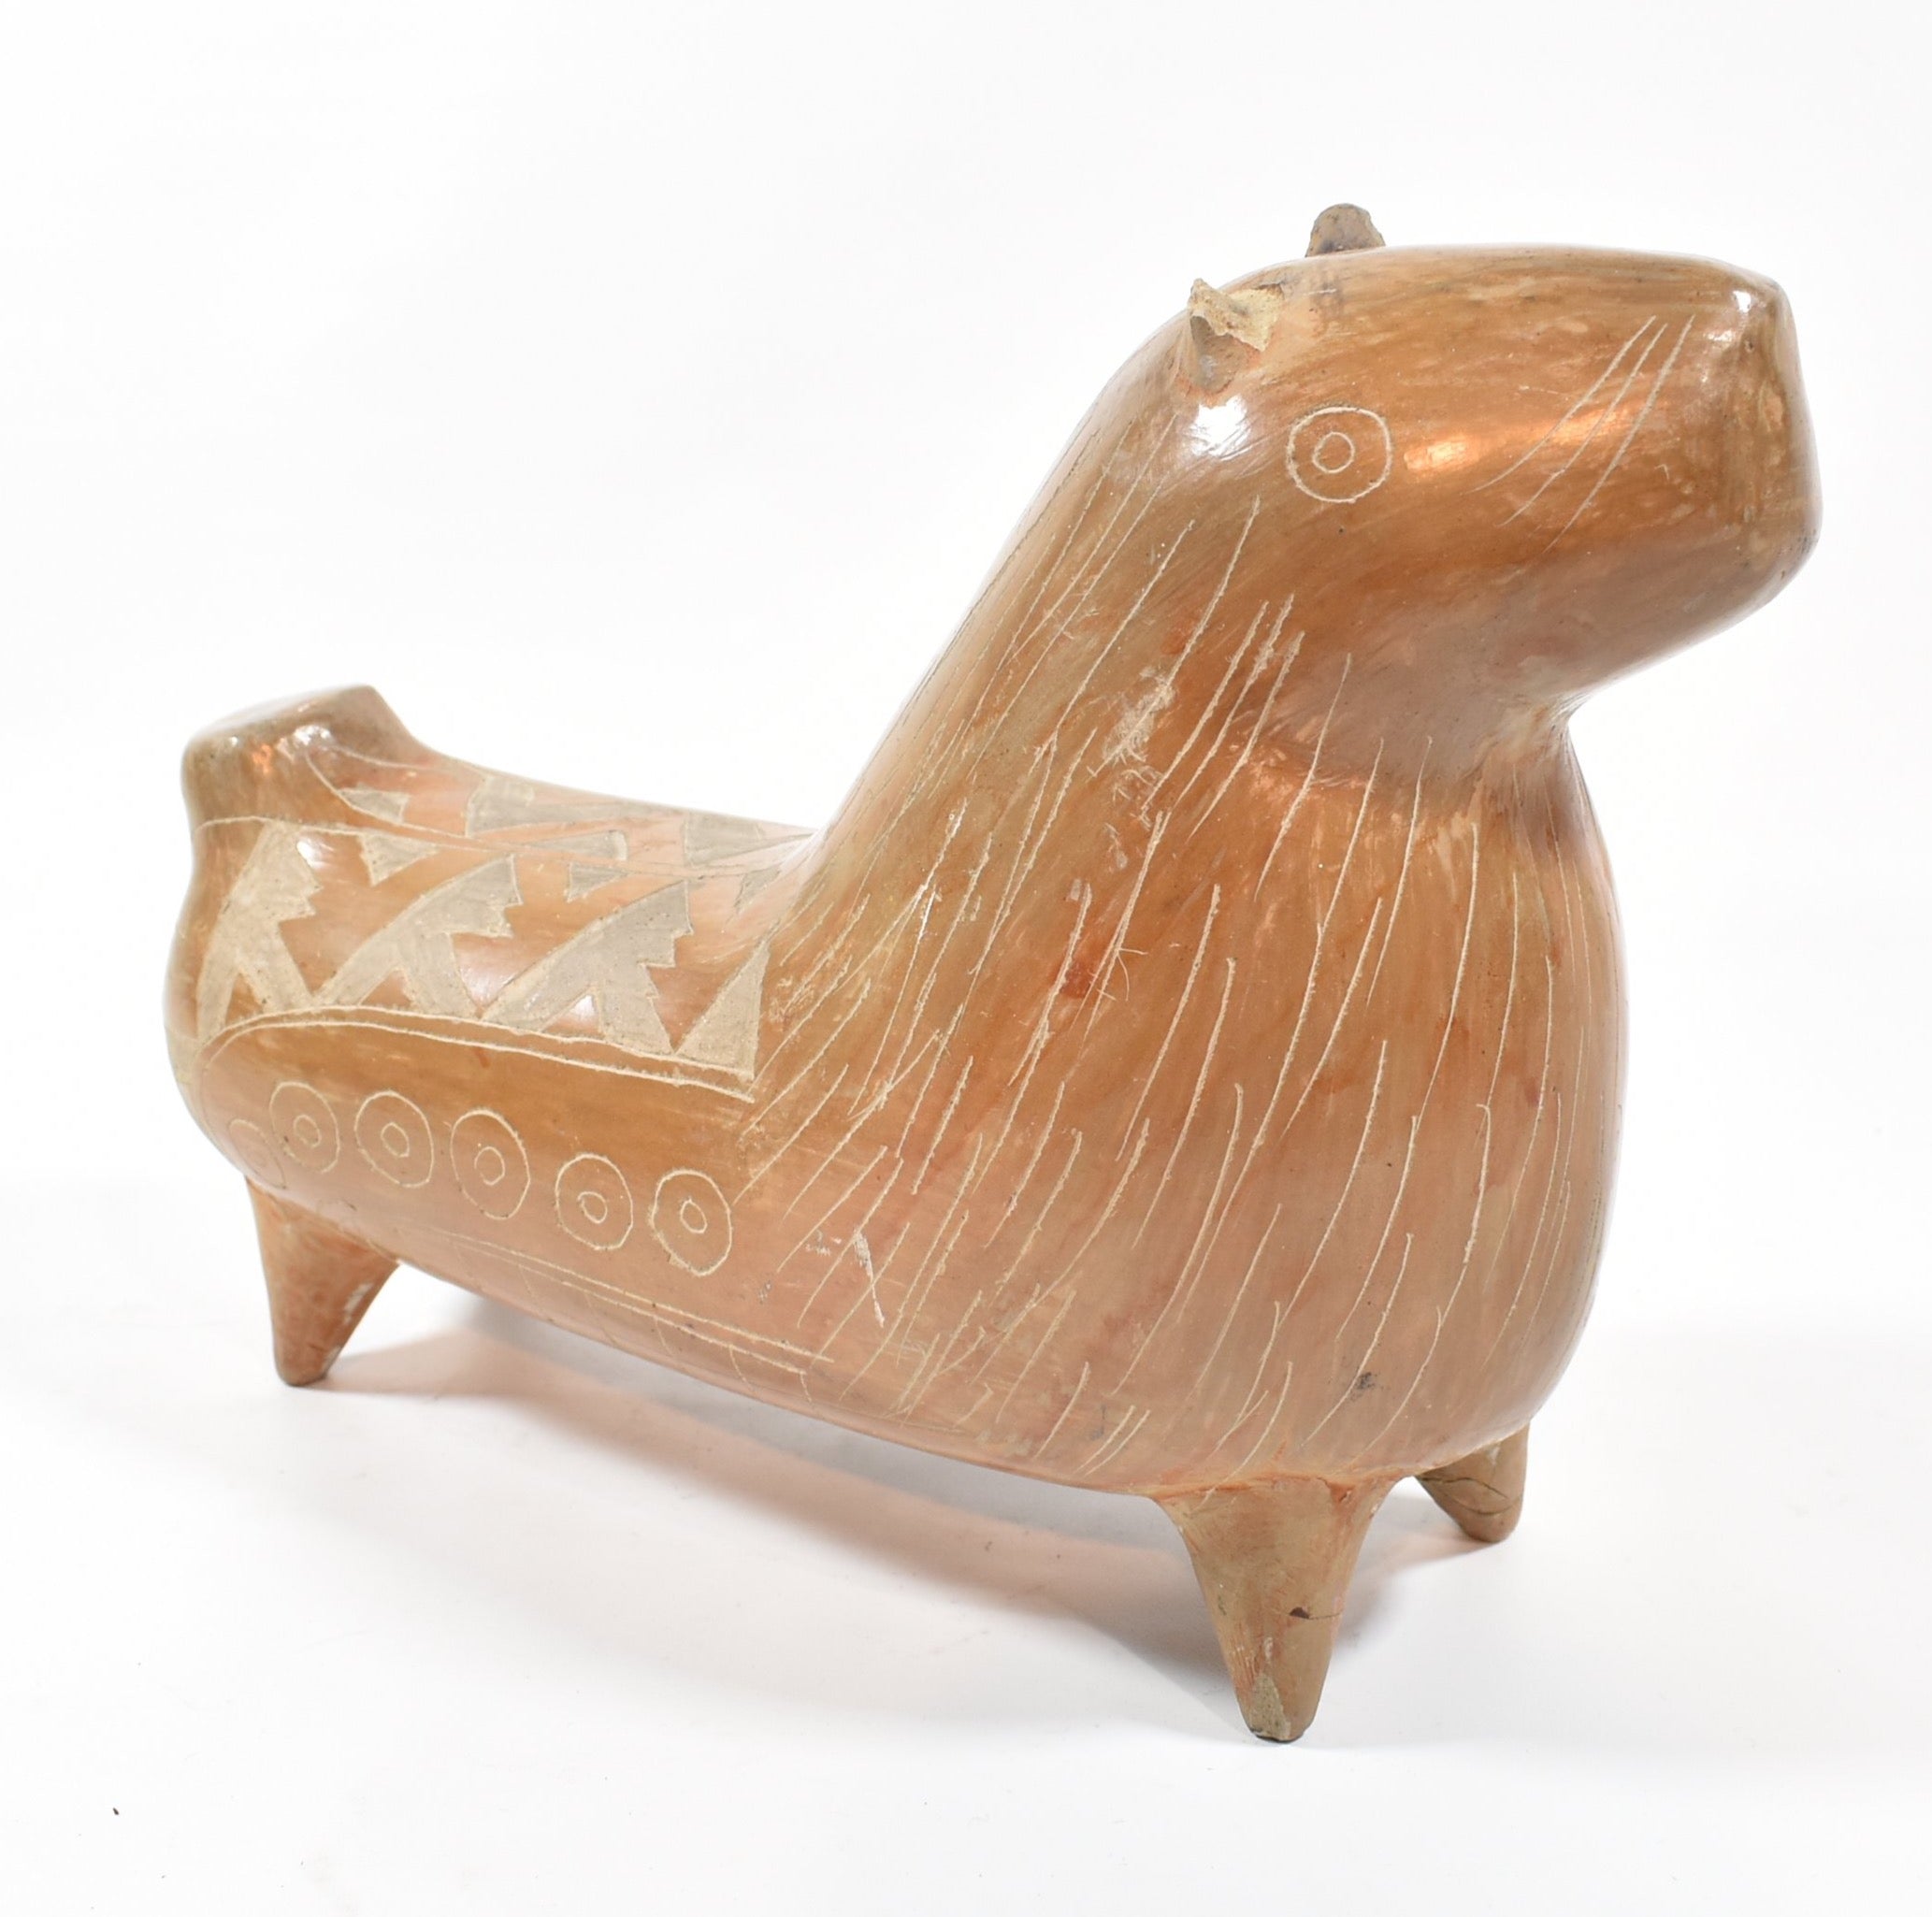 Hand made Guinea pig 9 inch used brown Clay exclusive artwork piece